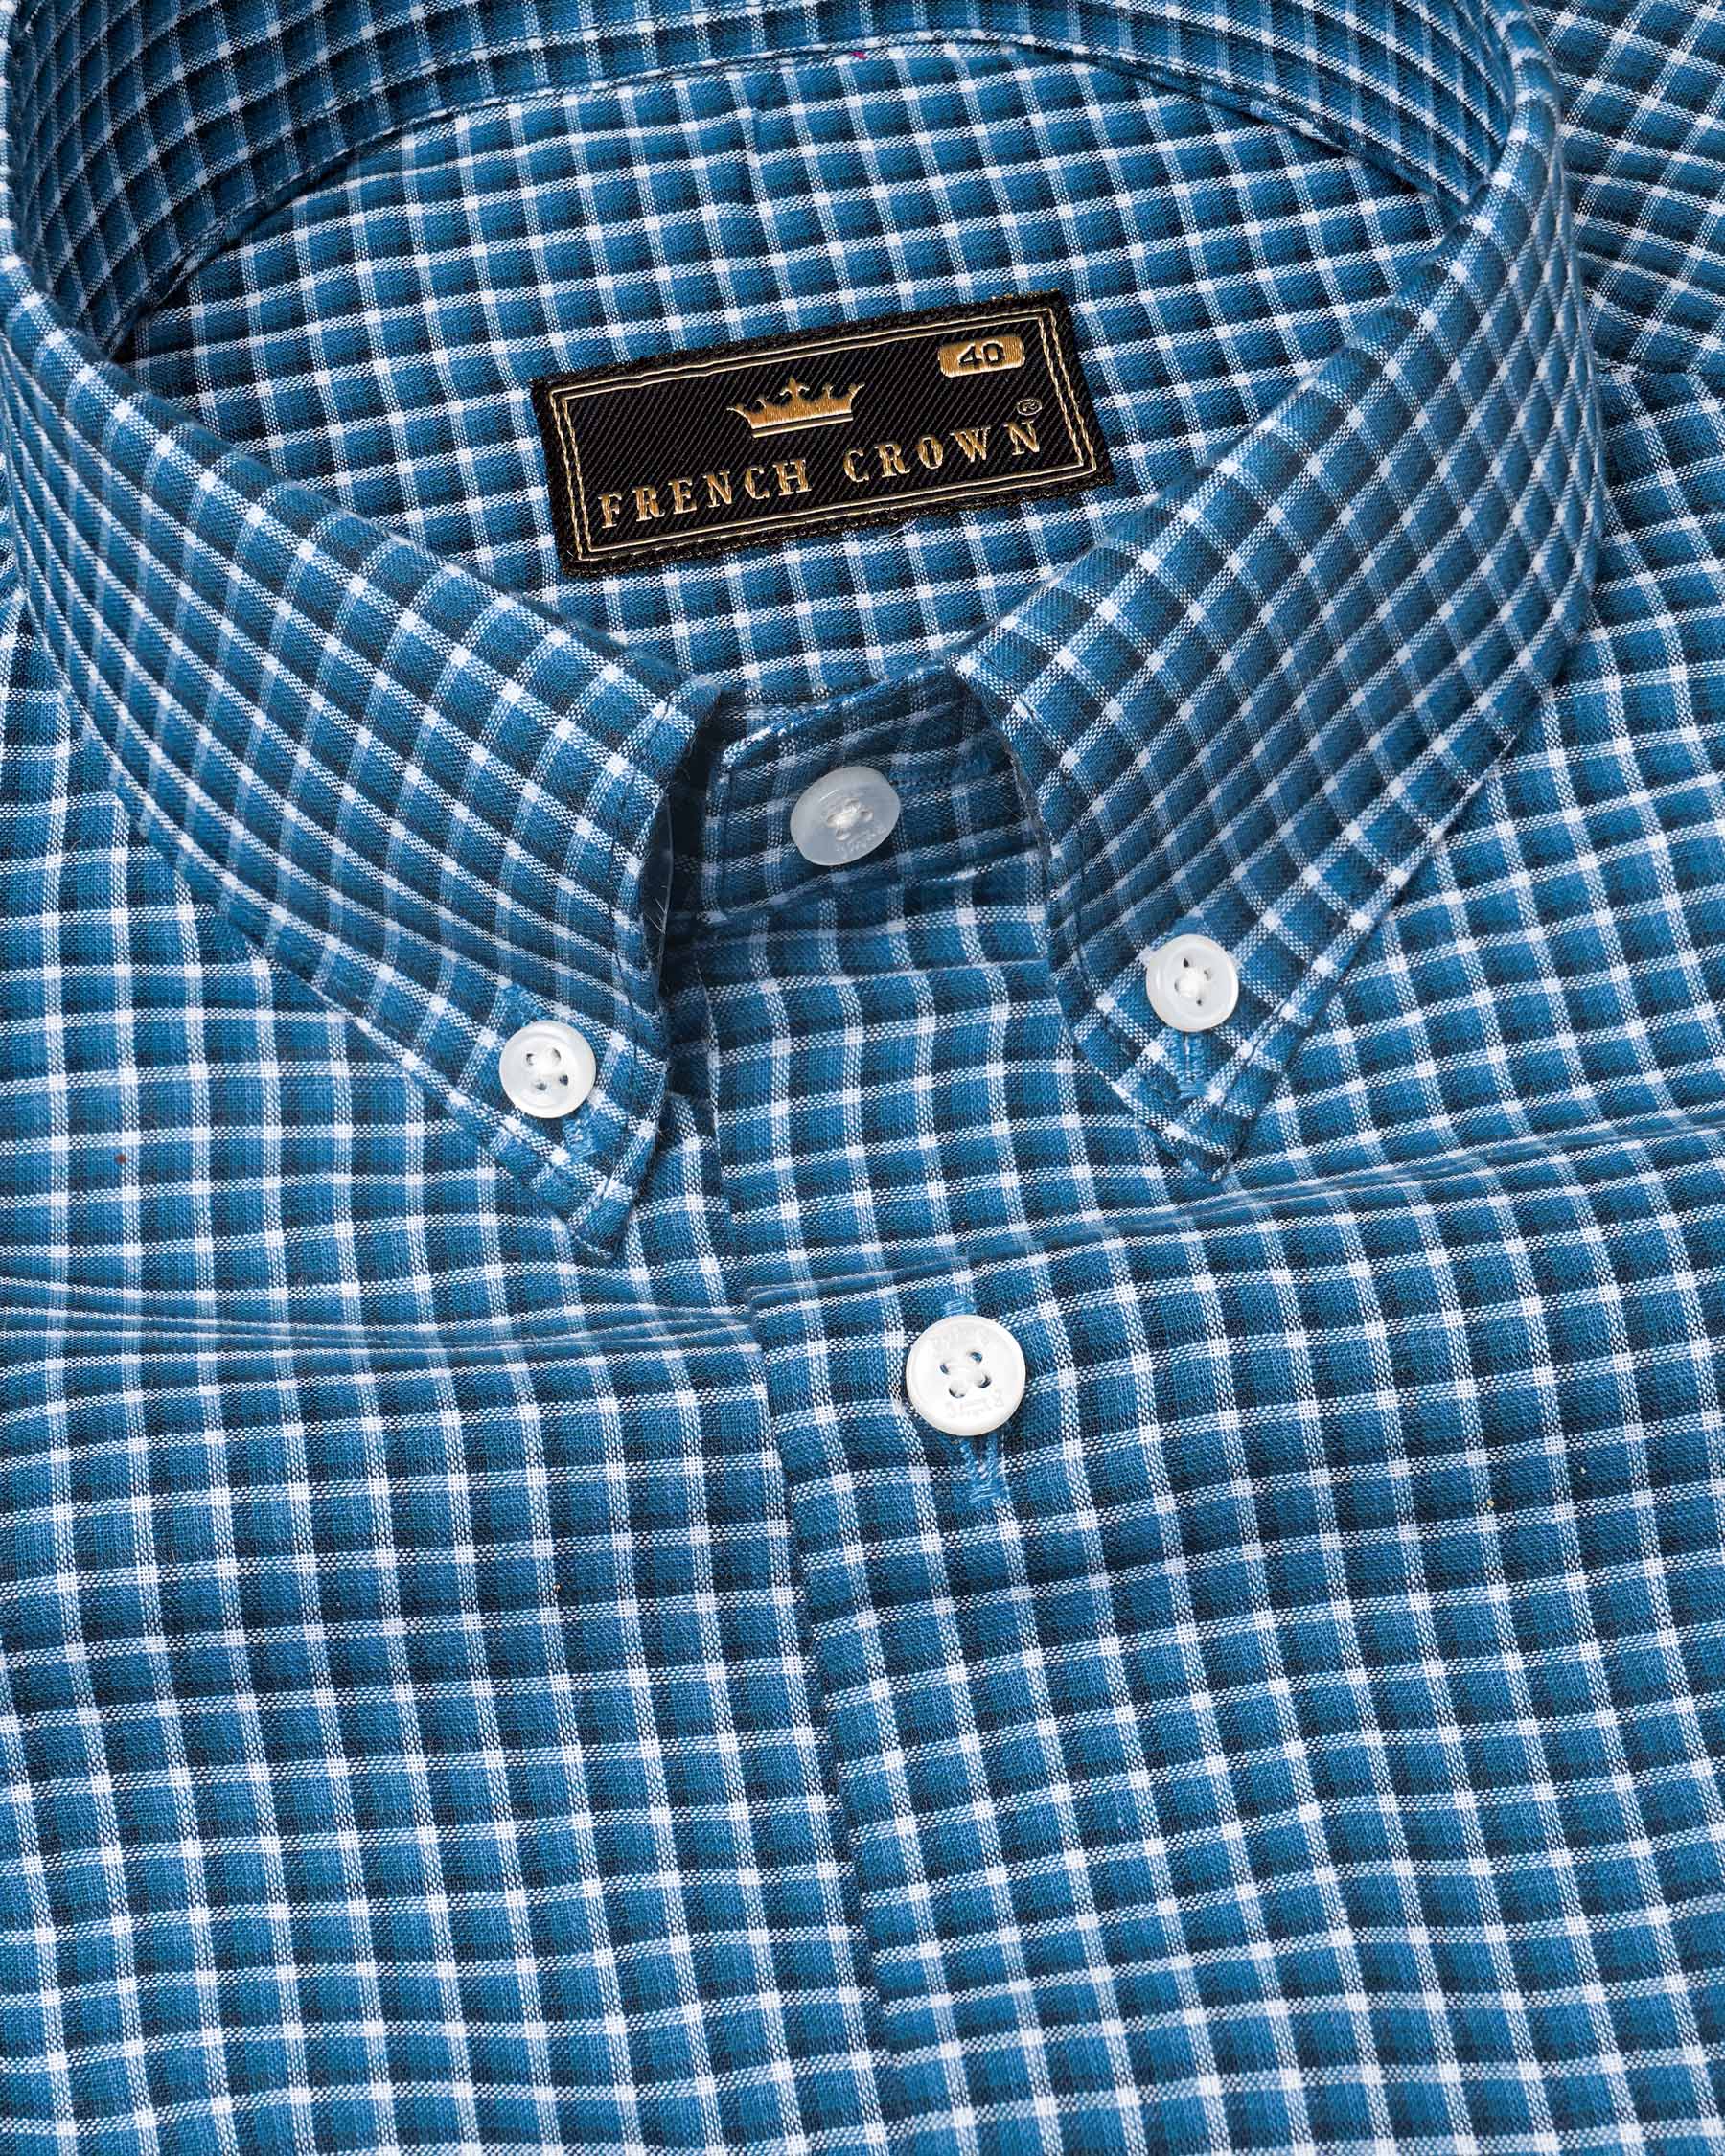 Jelly Bean Blue With Bright White Checkered Twill Premium Cotton Shirt 7704-BD-38,7704-BD-38,7704-BD-39,7704-BD-39,7704-BD-40,7704-BD-40,7704-BD-42,7704-BD-42,7704-BD-44,7704-BD-44,7704-BD-46,7704-BD-46,7704-BD-48,7704-BD-48,7704-BD-50,7704-BD-50,7704-BD-52,7704-BD-52